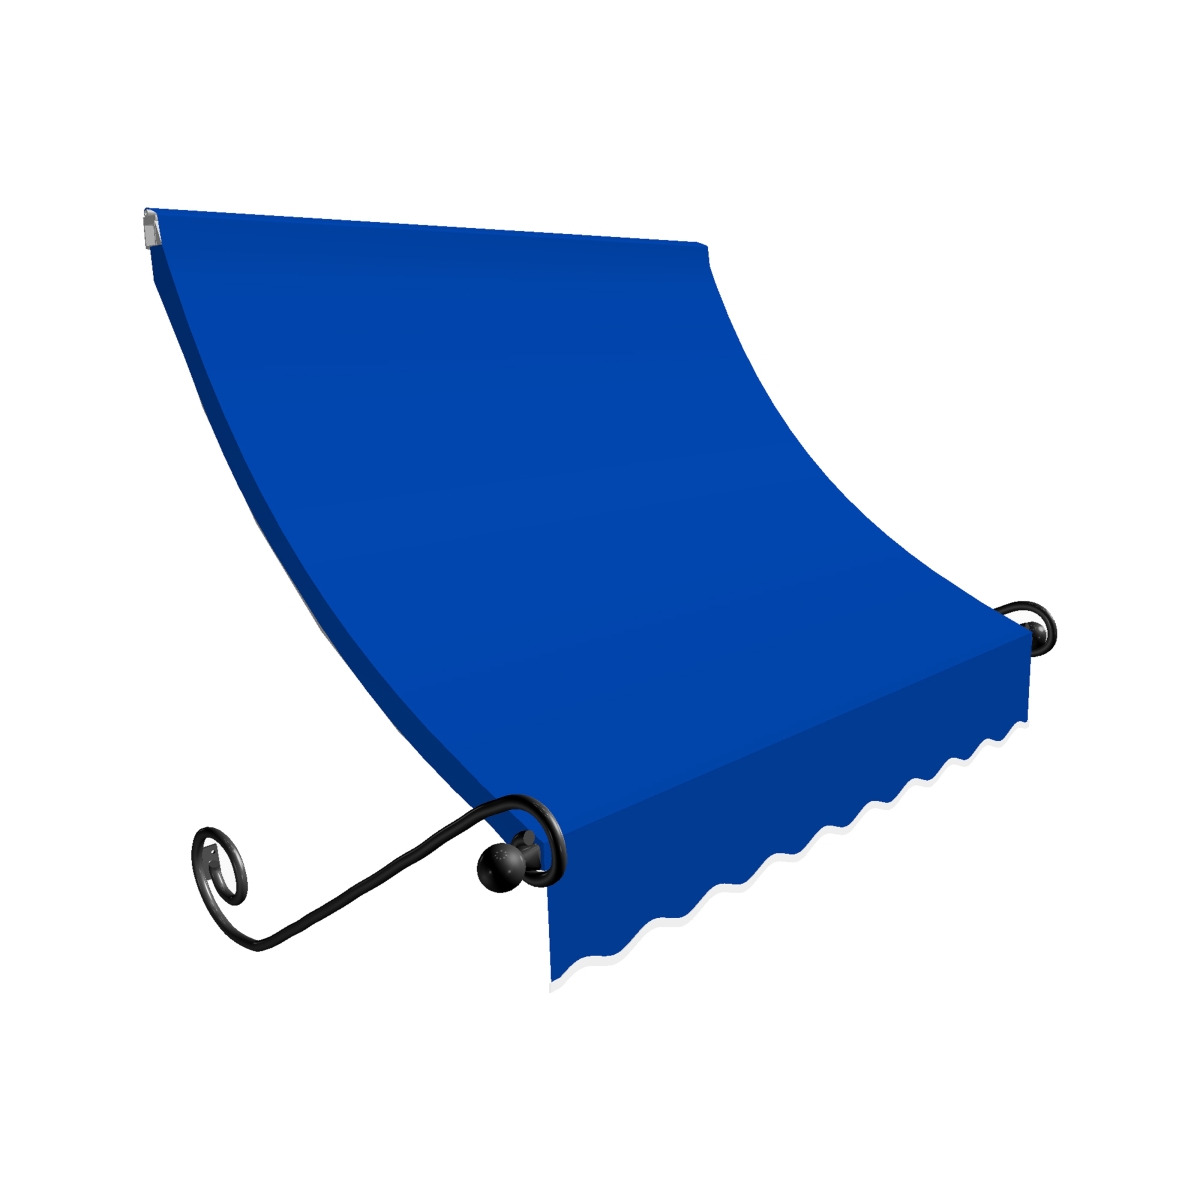 Ch33-us-5bb 5.38 Ft. Charleston Window & Entry Awning, Bright Blue - 44 X 36 In.